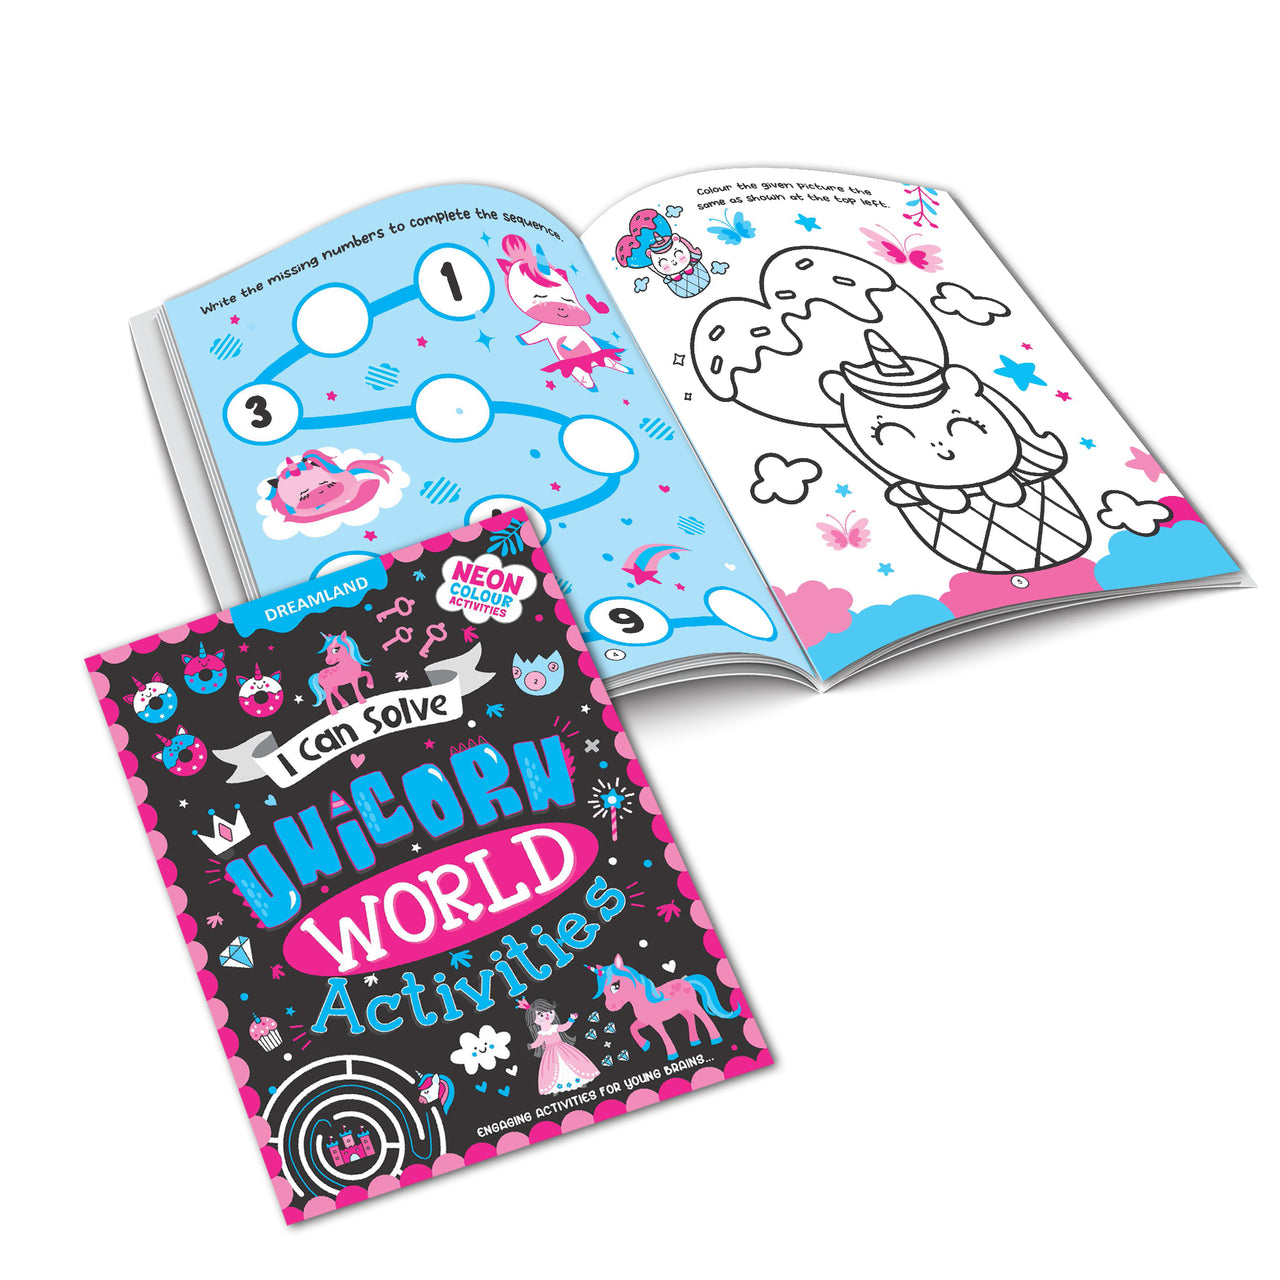 Dreamland Publications Unicorn World Activities - I Can Solve Activity Book for Kids Age 4- 8 Years | With Colouring Pages, Mazes, Dot-to-Dots - Distacart